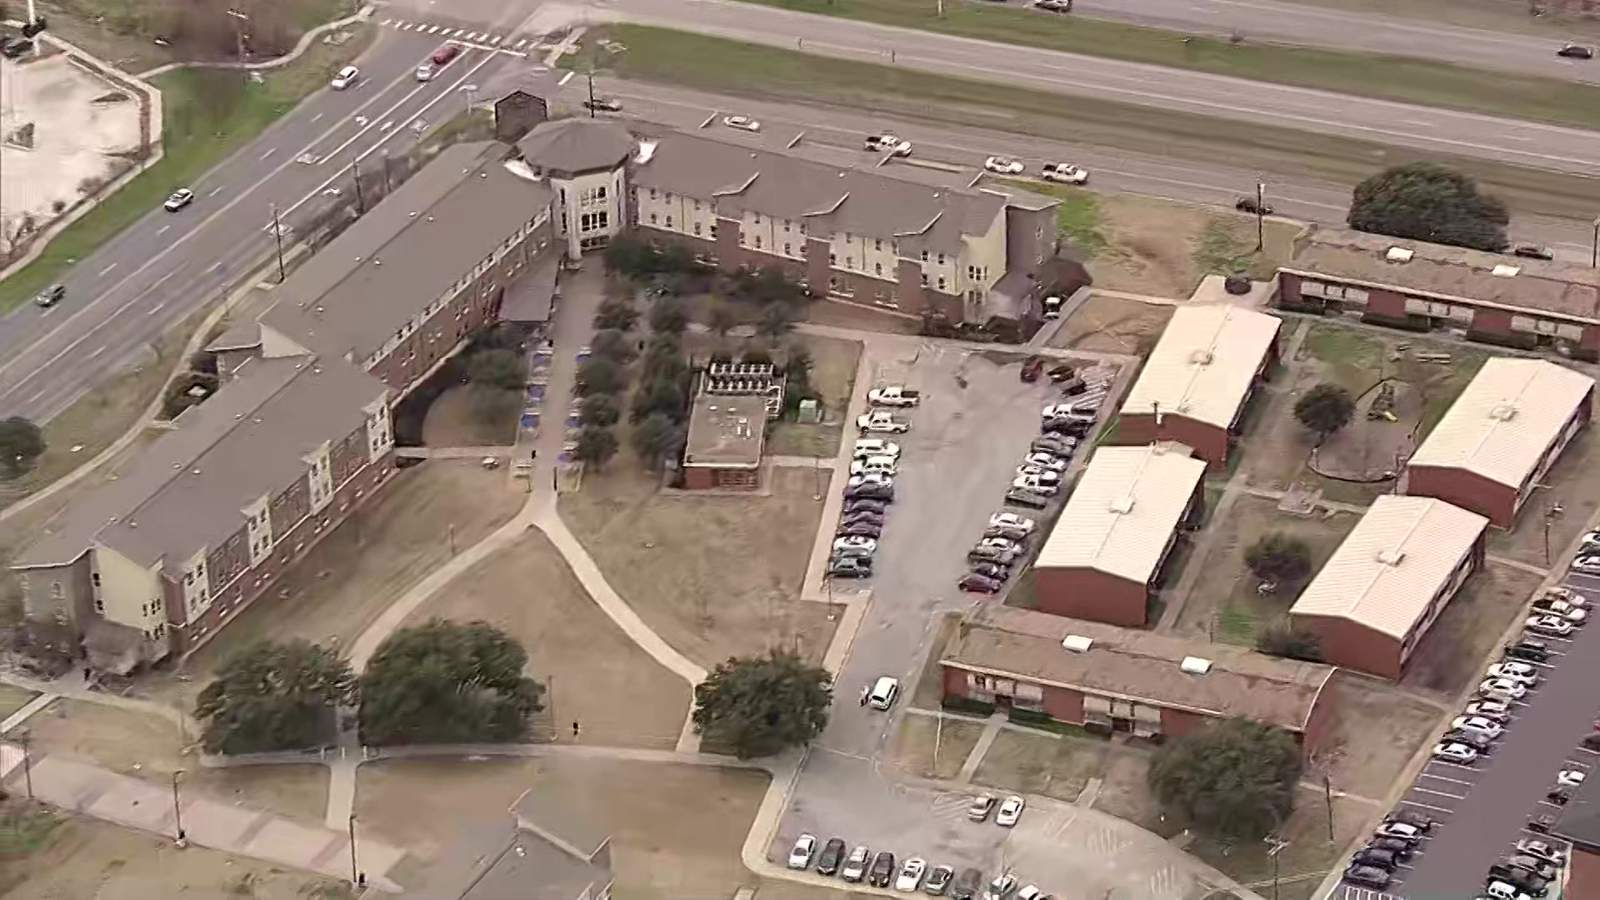 2 women killed, child hurt in shooting at Texas dormitory